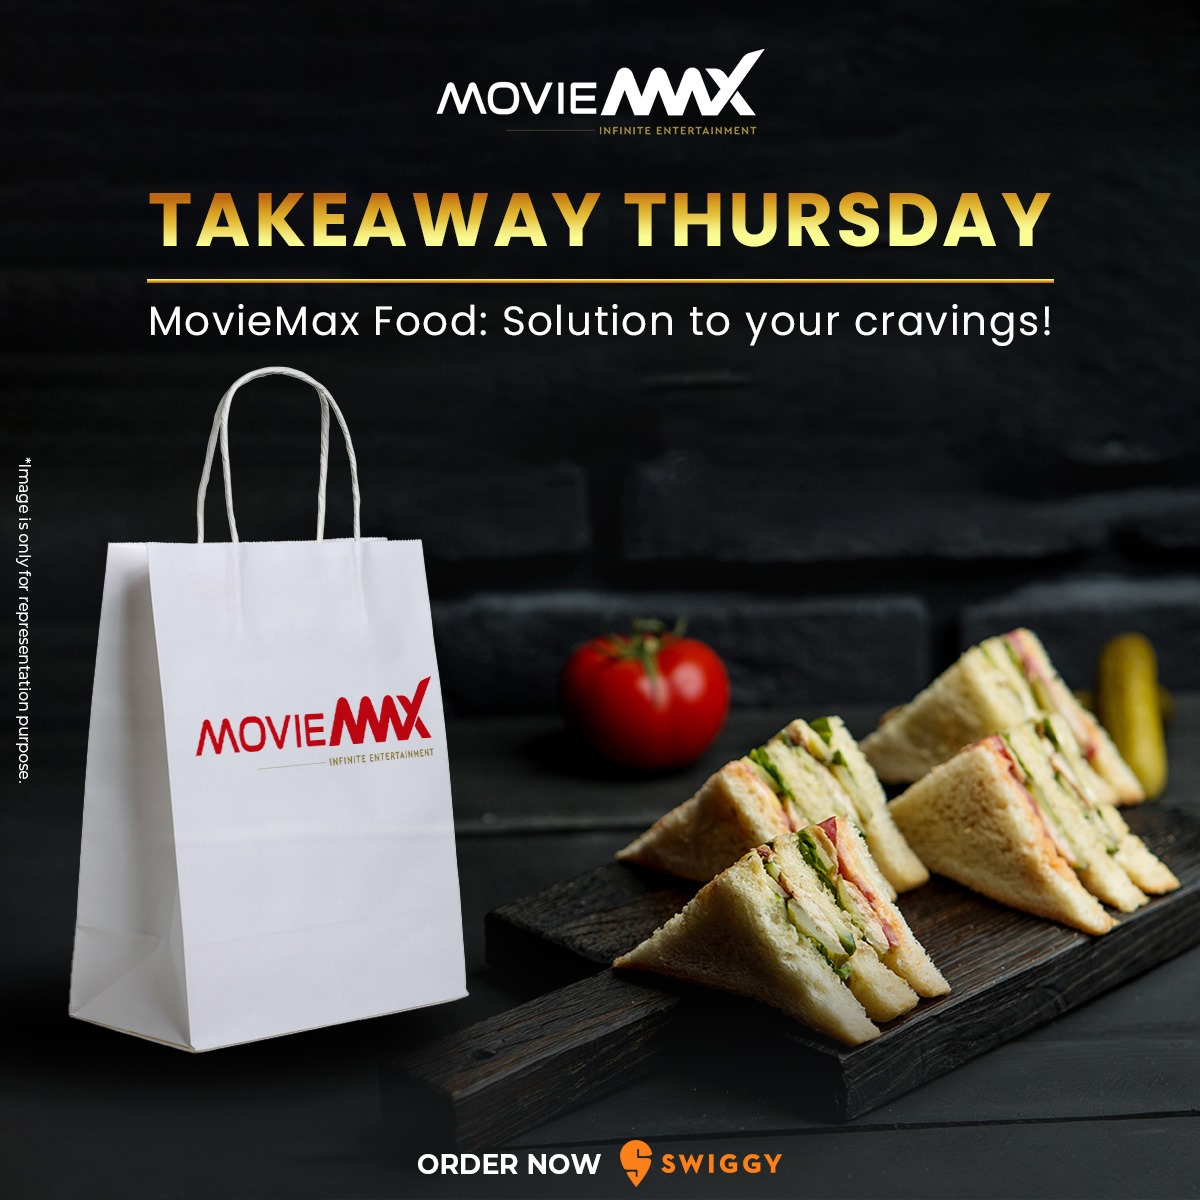 Takeaway Thursday just got tastier with #MovieMax food - the ultimate solution to all your cravings! 😋  
Order now on @swiggy and treat yourself to cinema-worthy snacks at home. 
 . 
. 
#MovieMaxOfficial #TakeawayThursday #MovieMaxFeast #MovieMaxfood #TakeawayFood